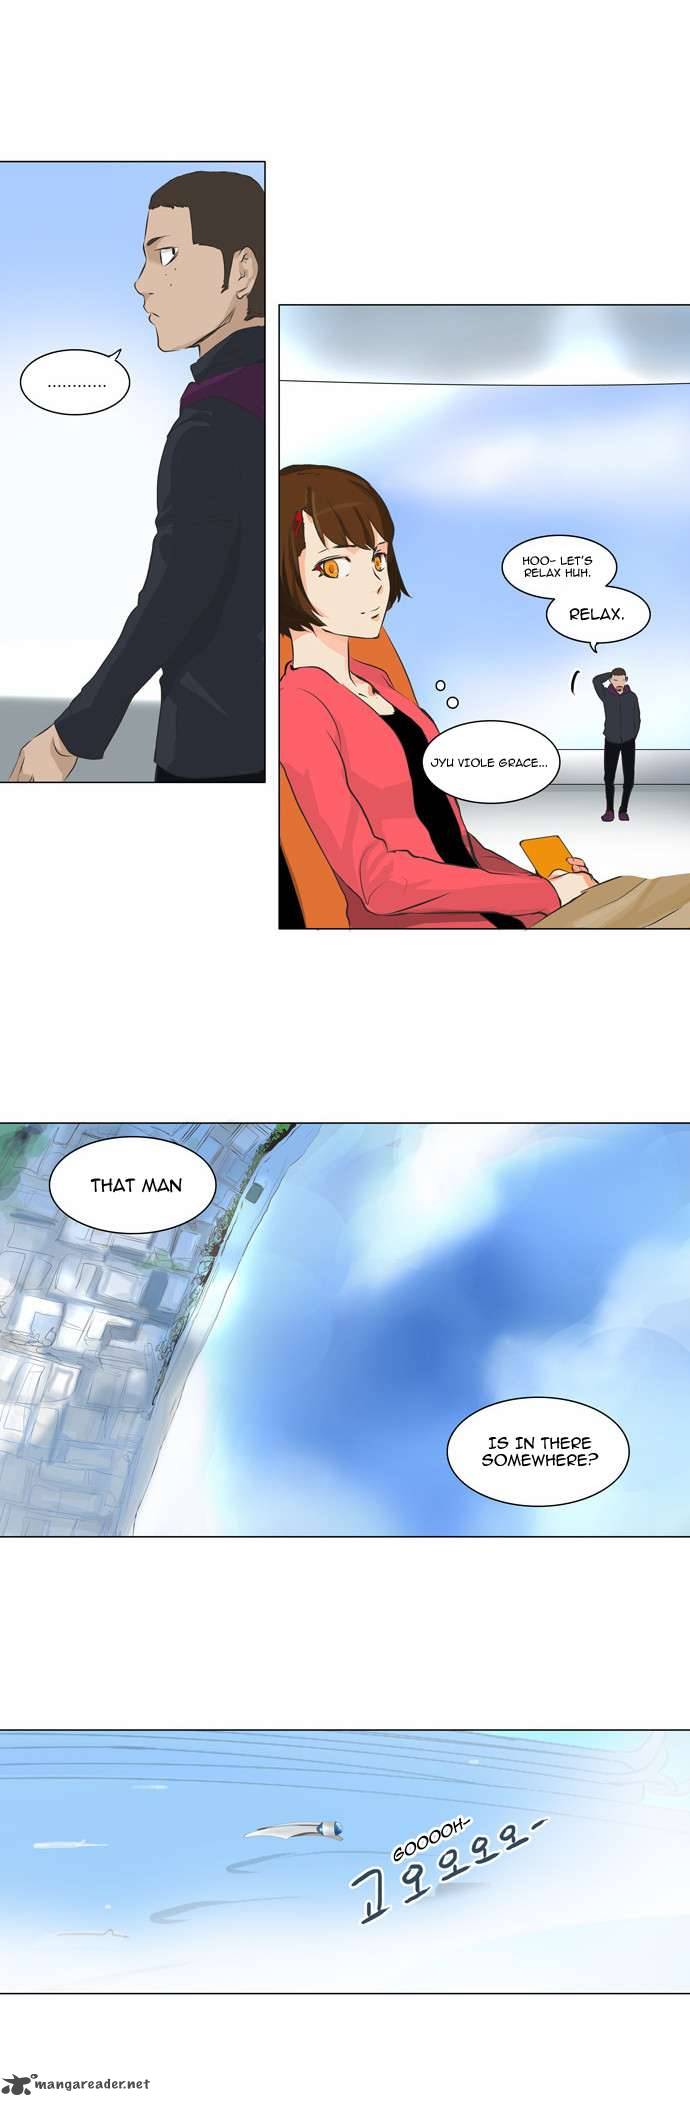 Tower Of God 136 16